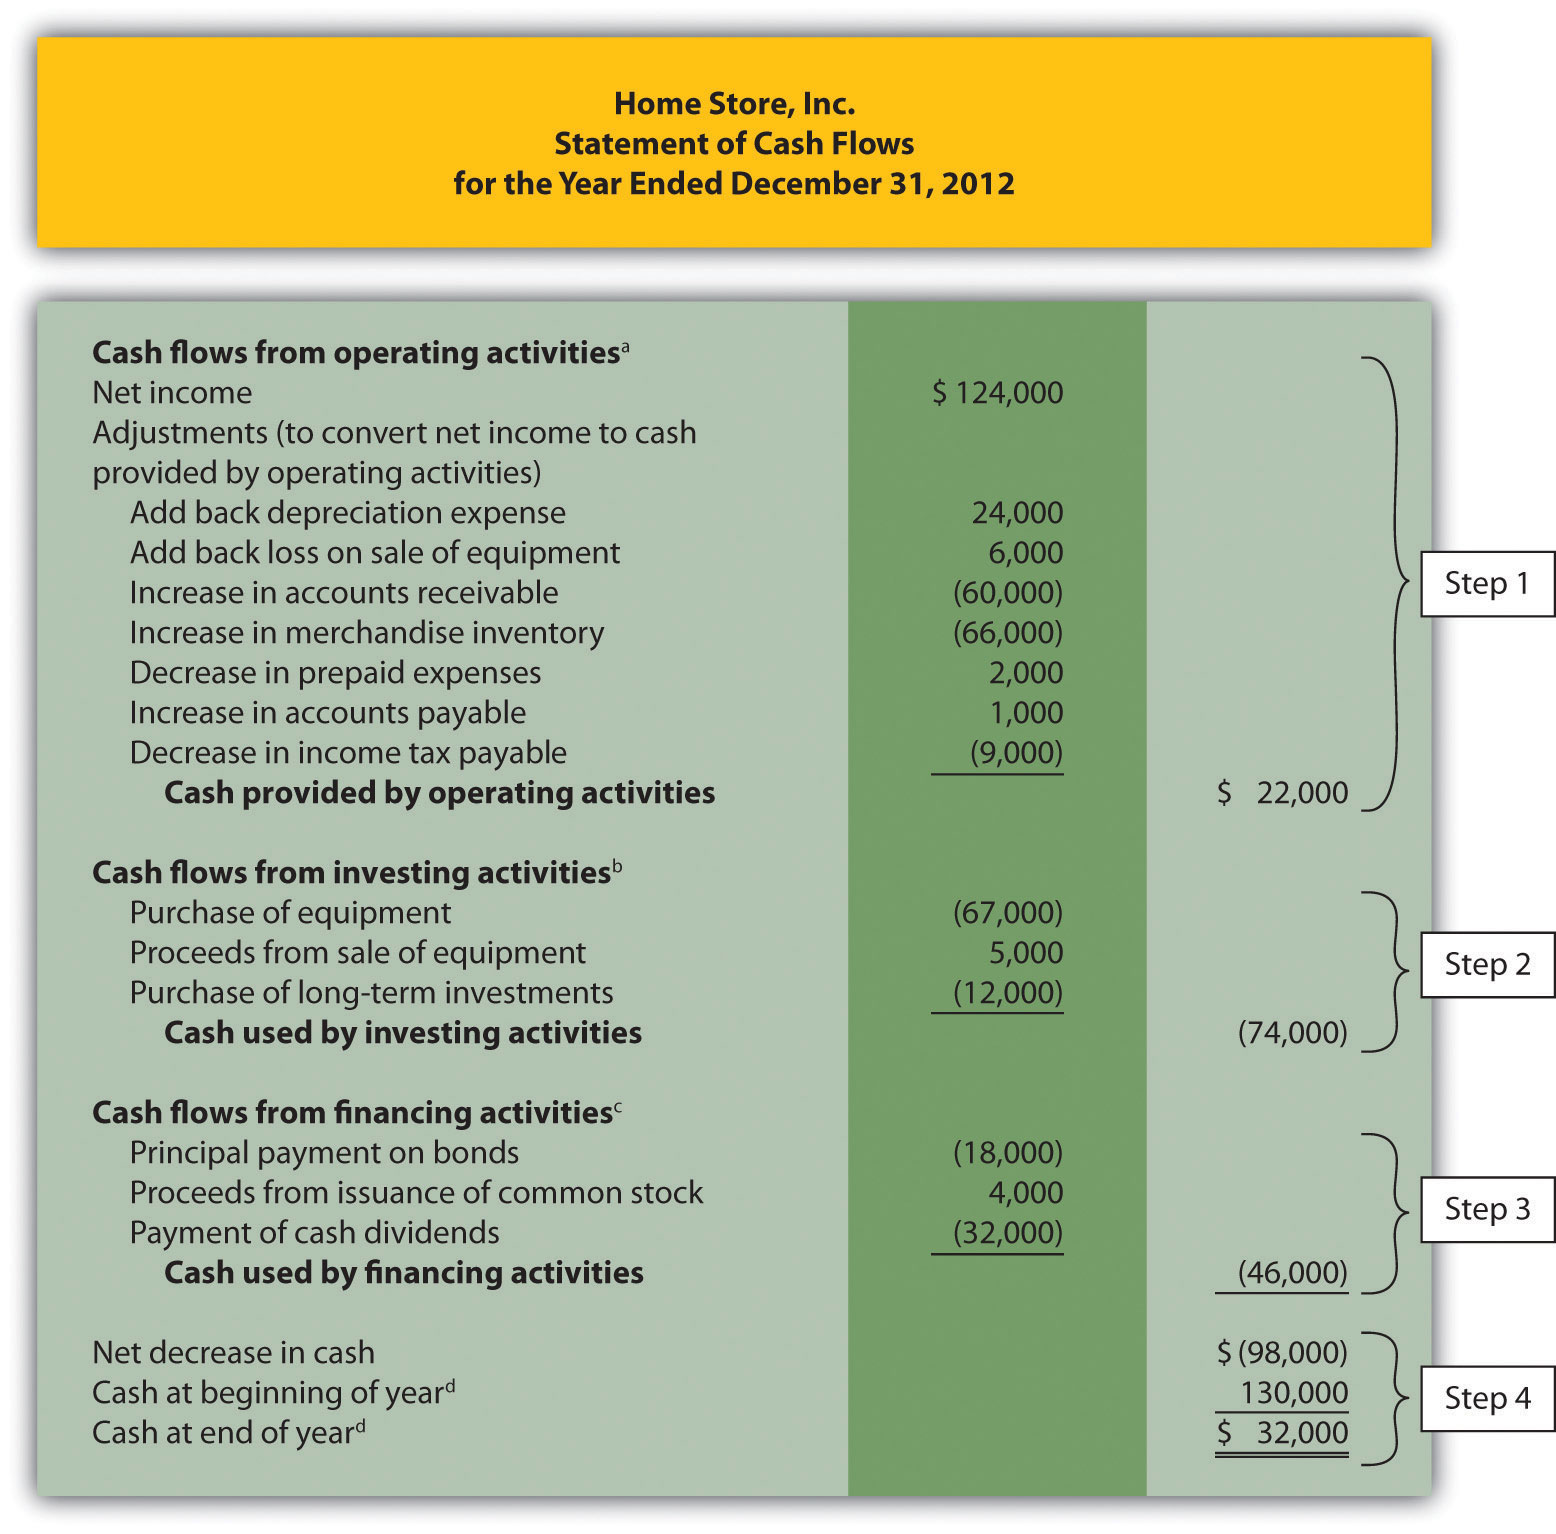 How Is the Statement of Cash Flows Prepared and Used?